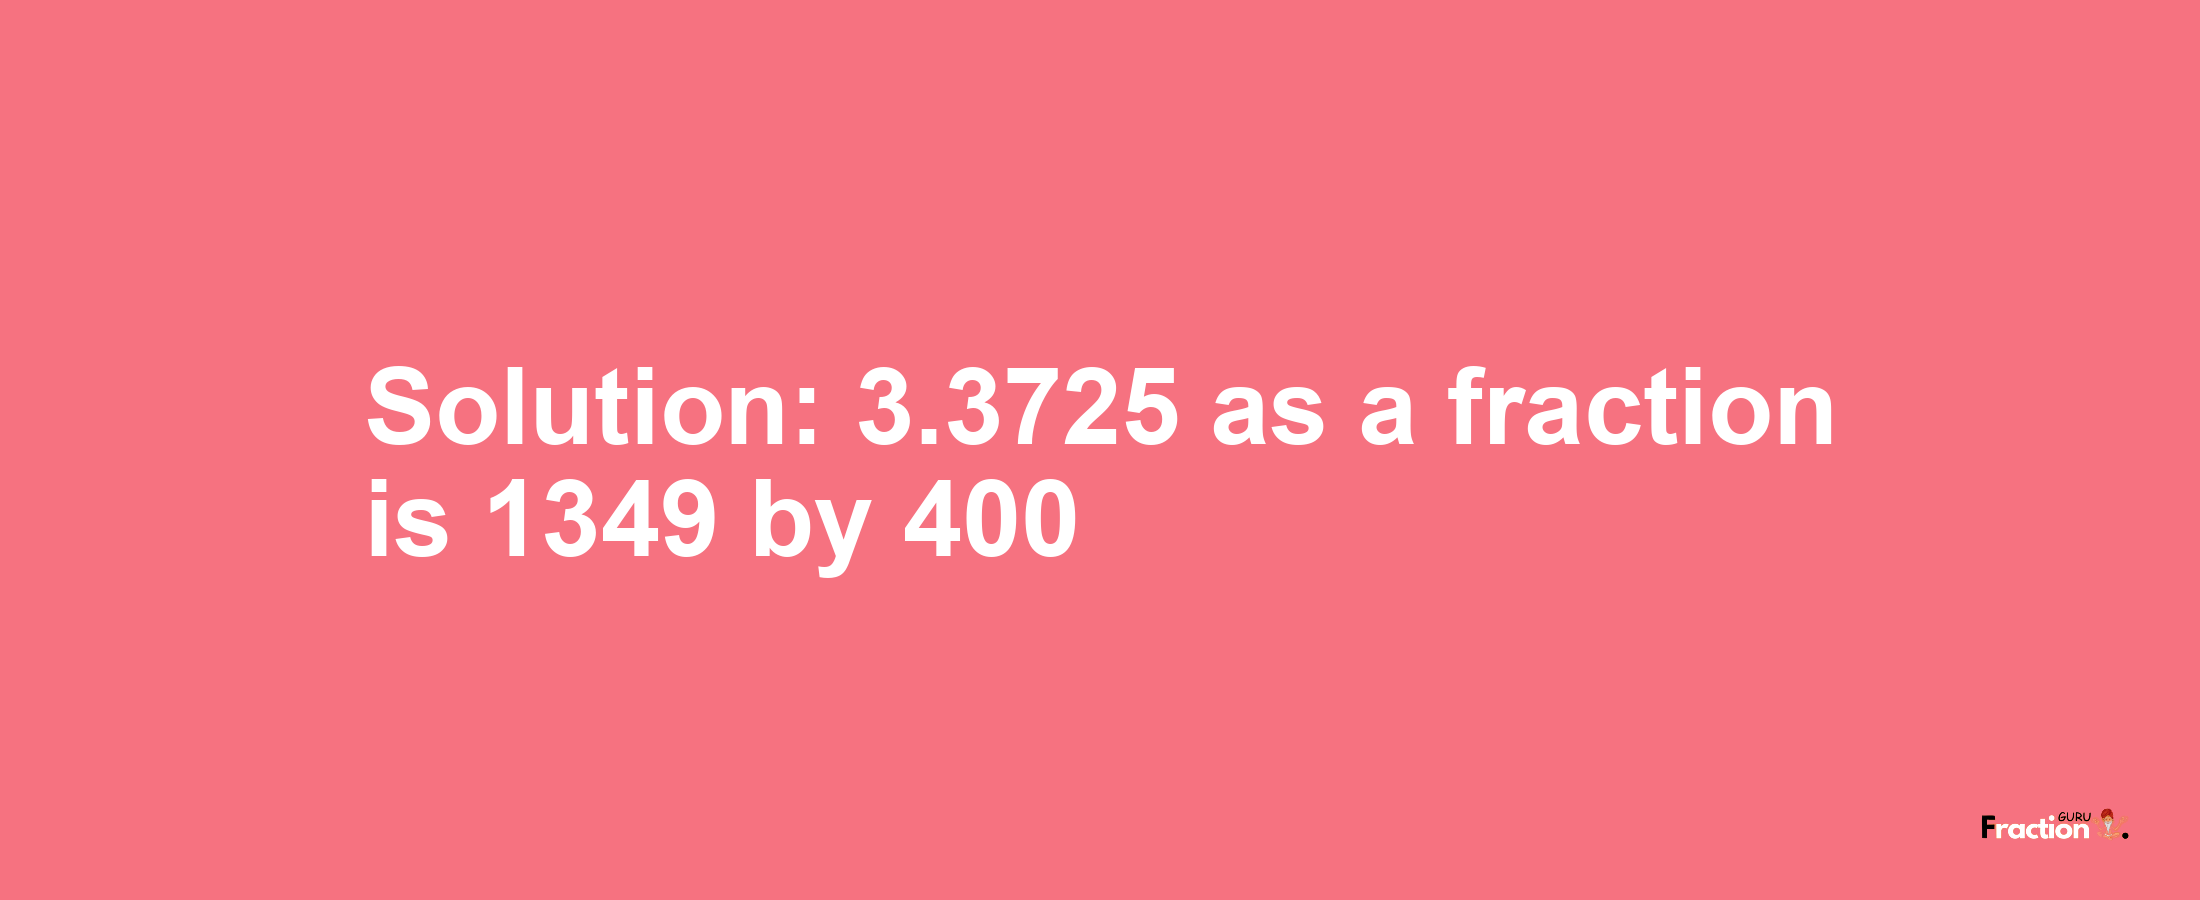 Solution:3.3725 as a fraction is 1349/400